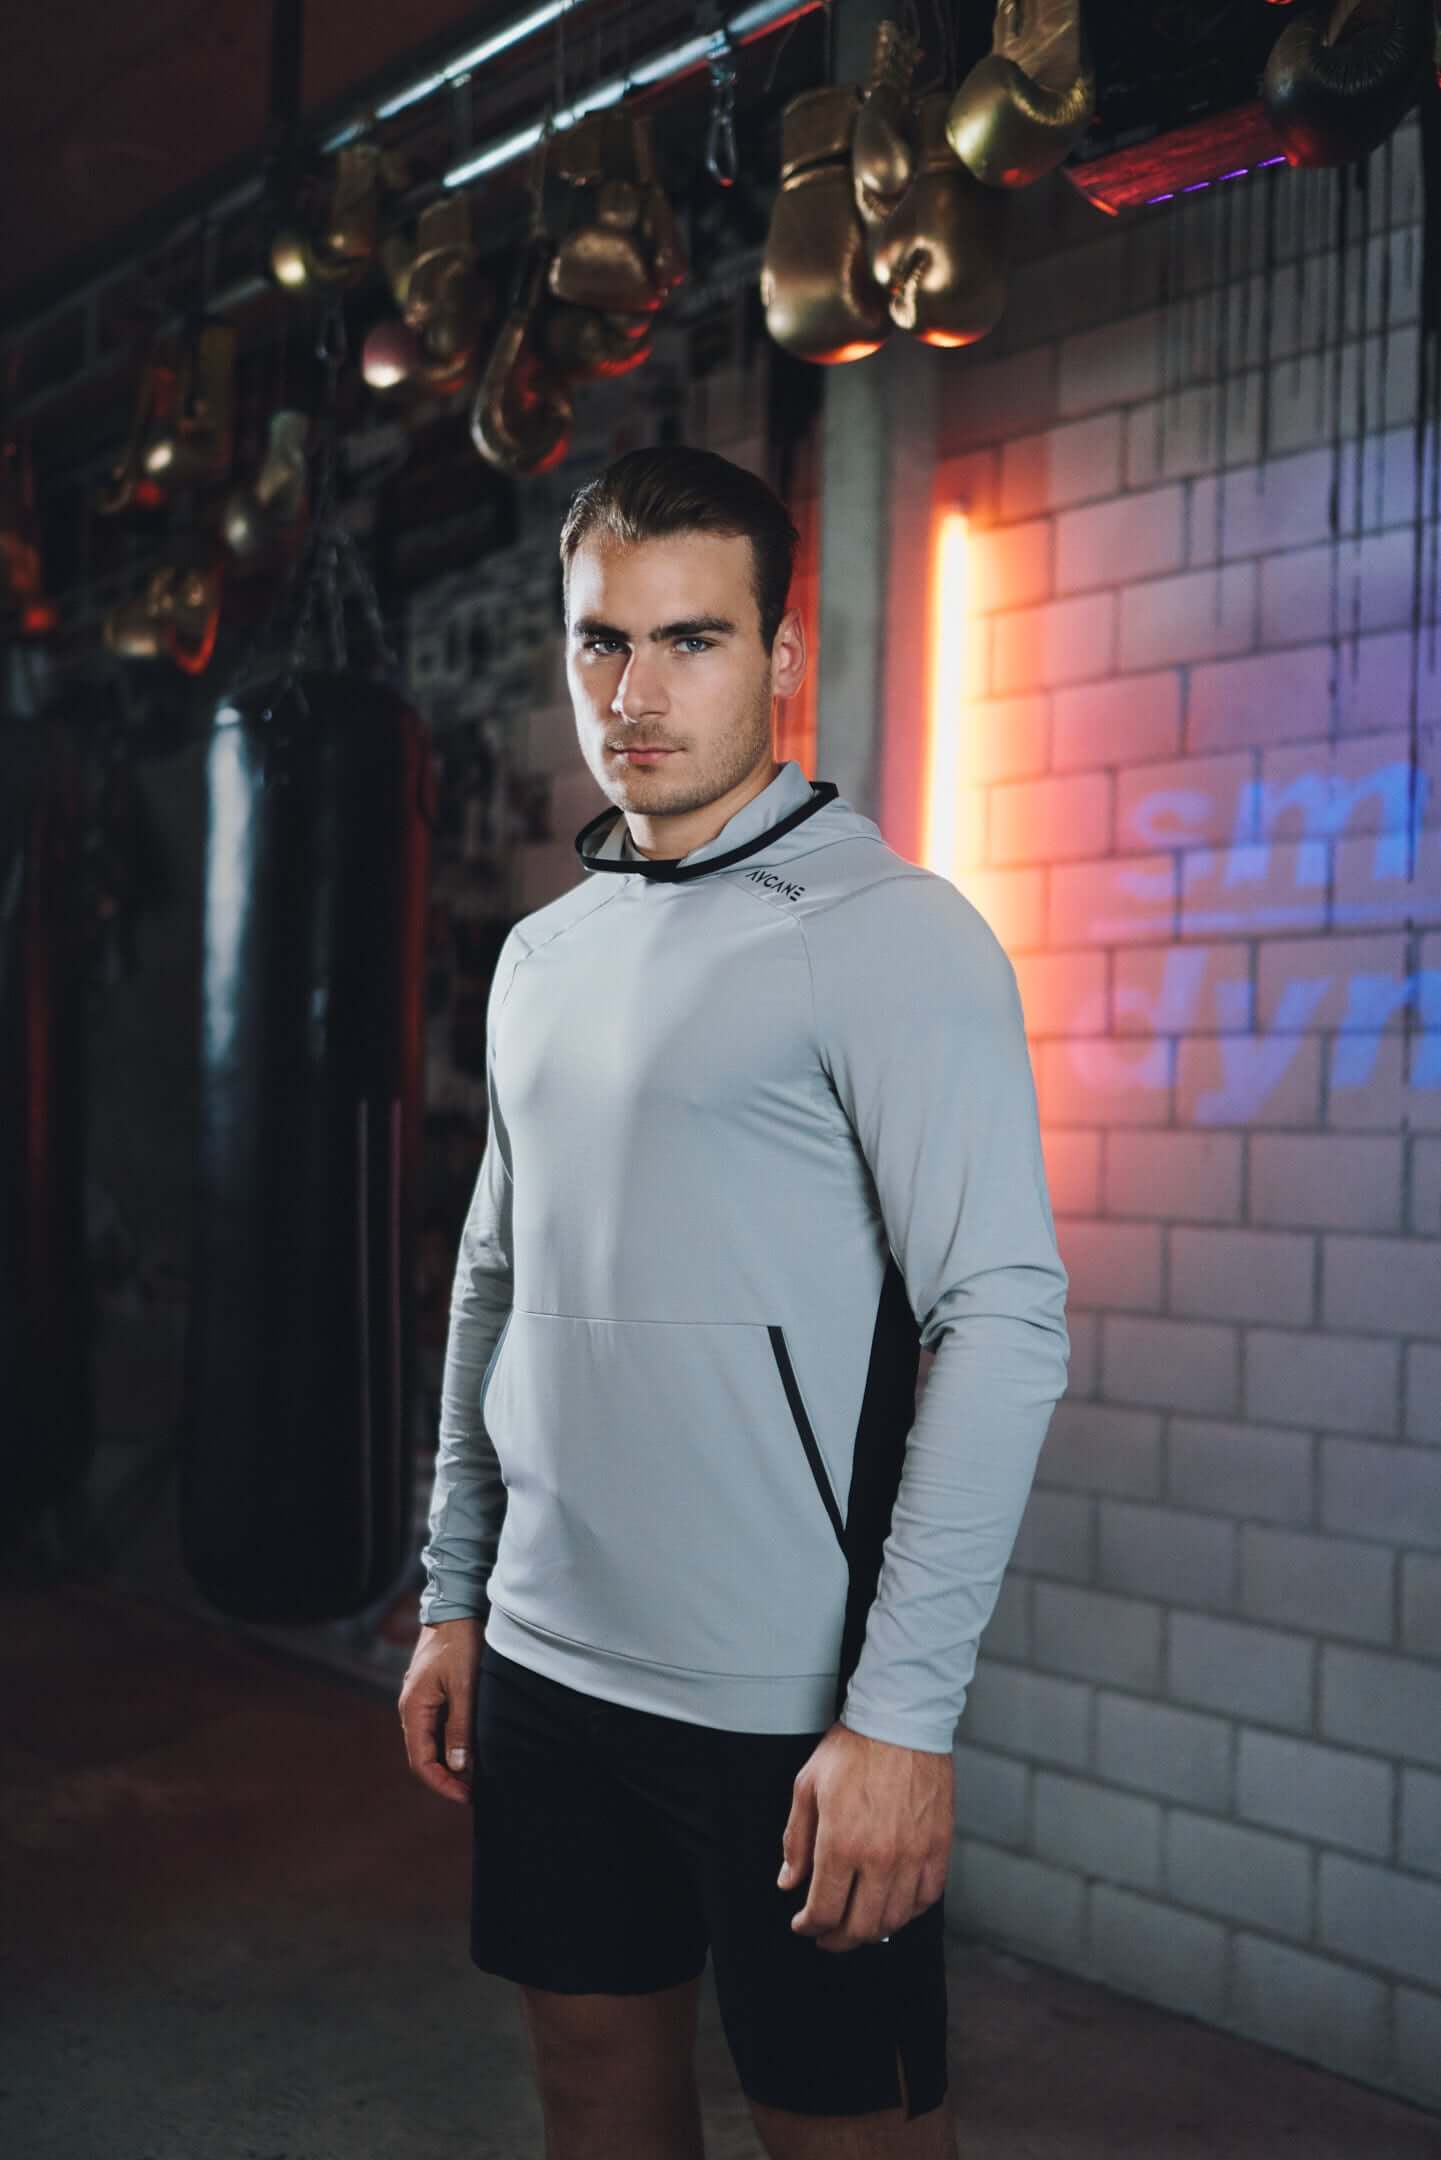 Timo Meier in the gym wearing a grey AYCANE hoodie and black shorts